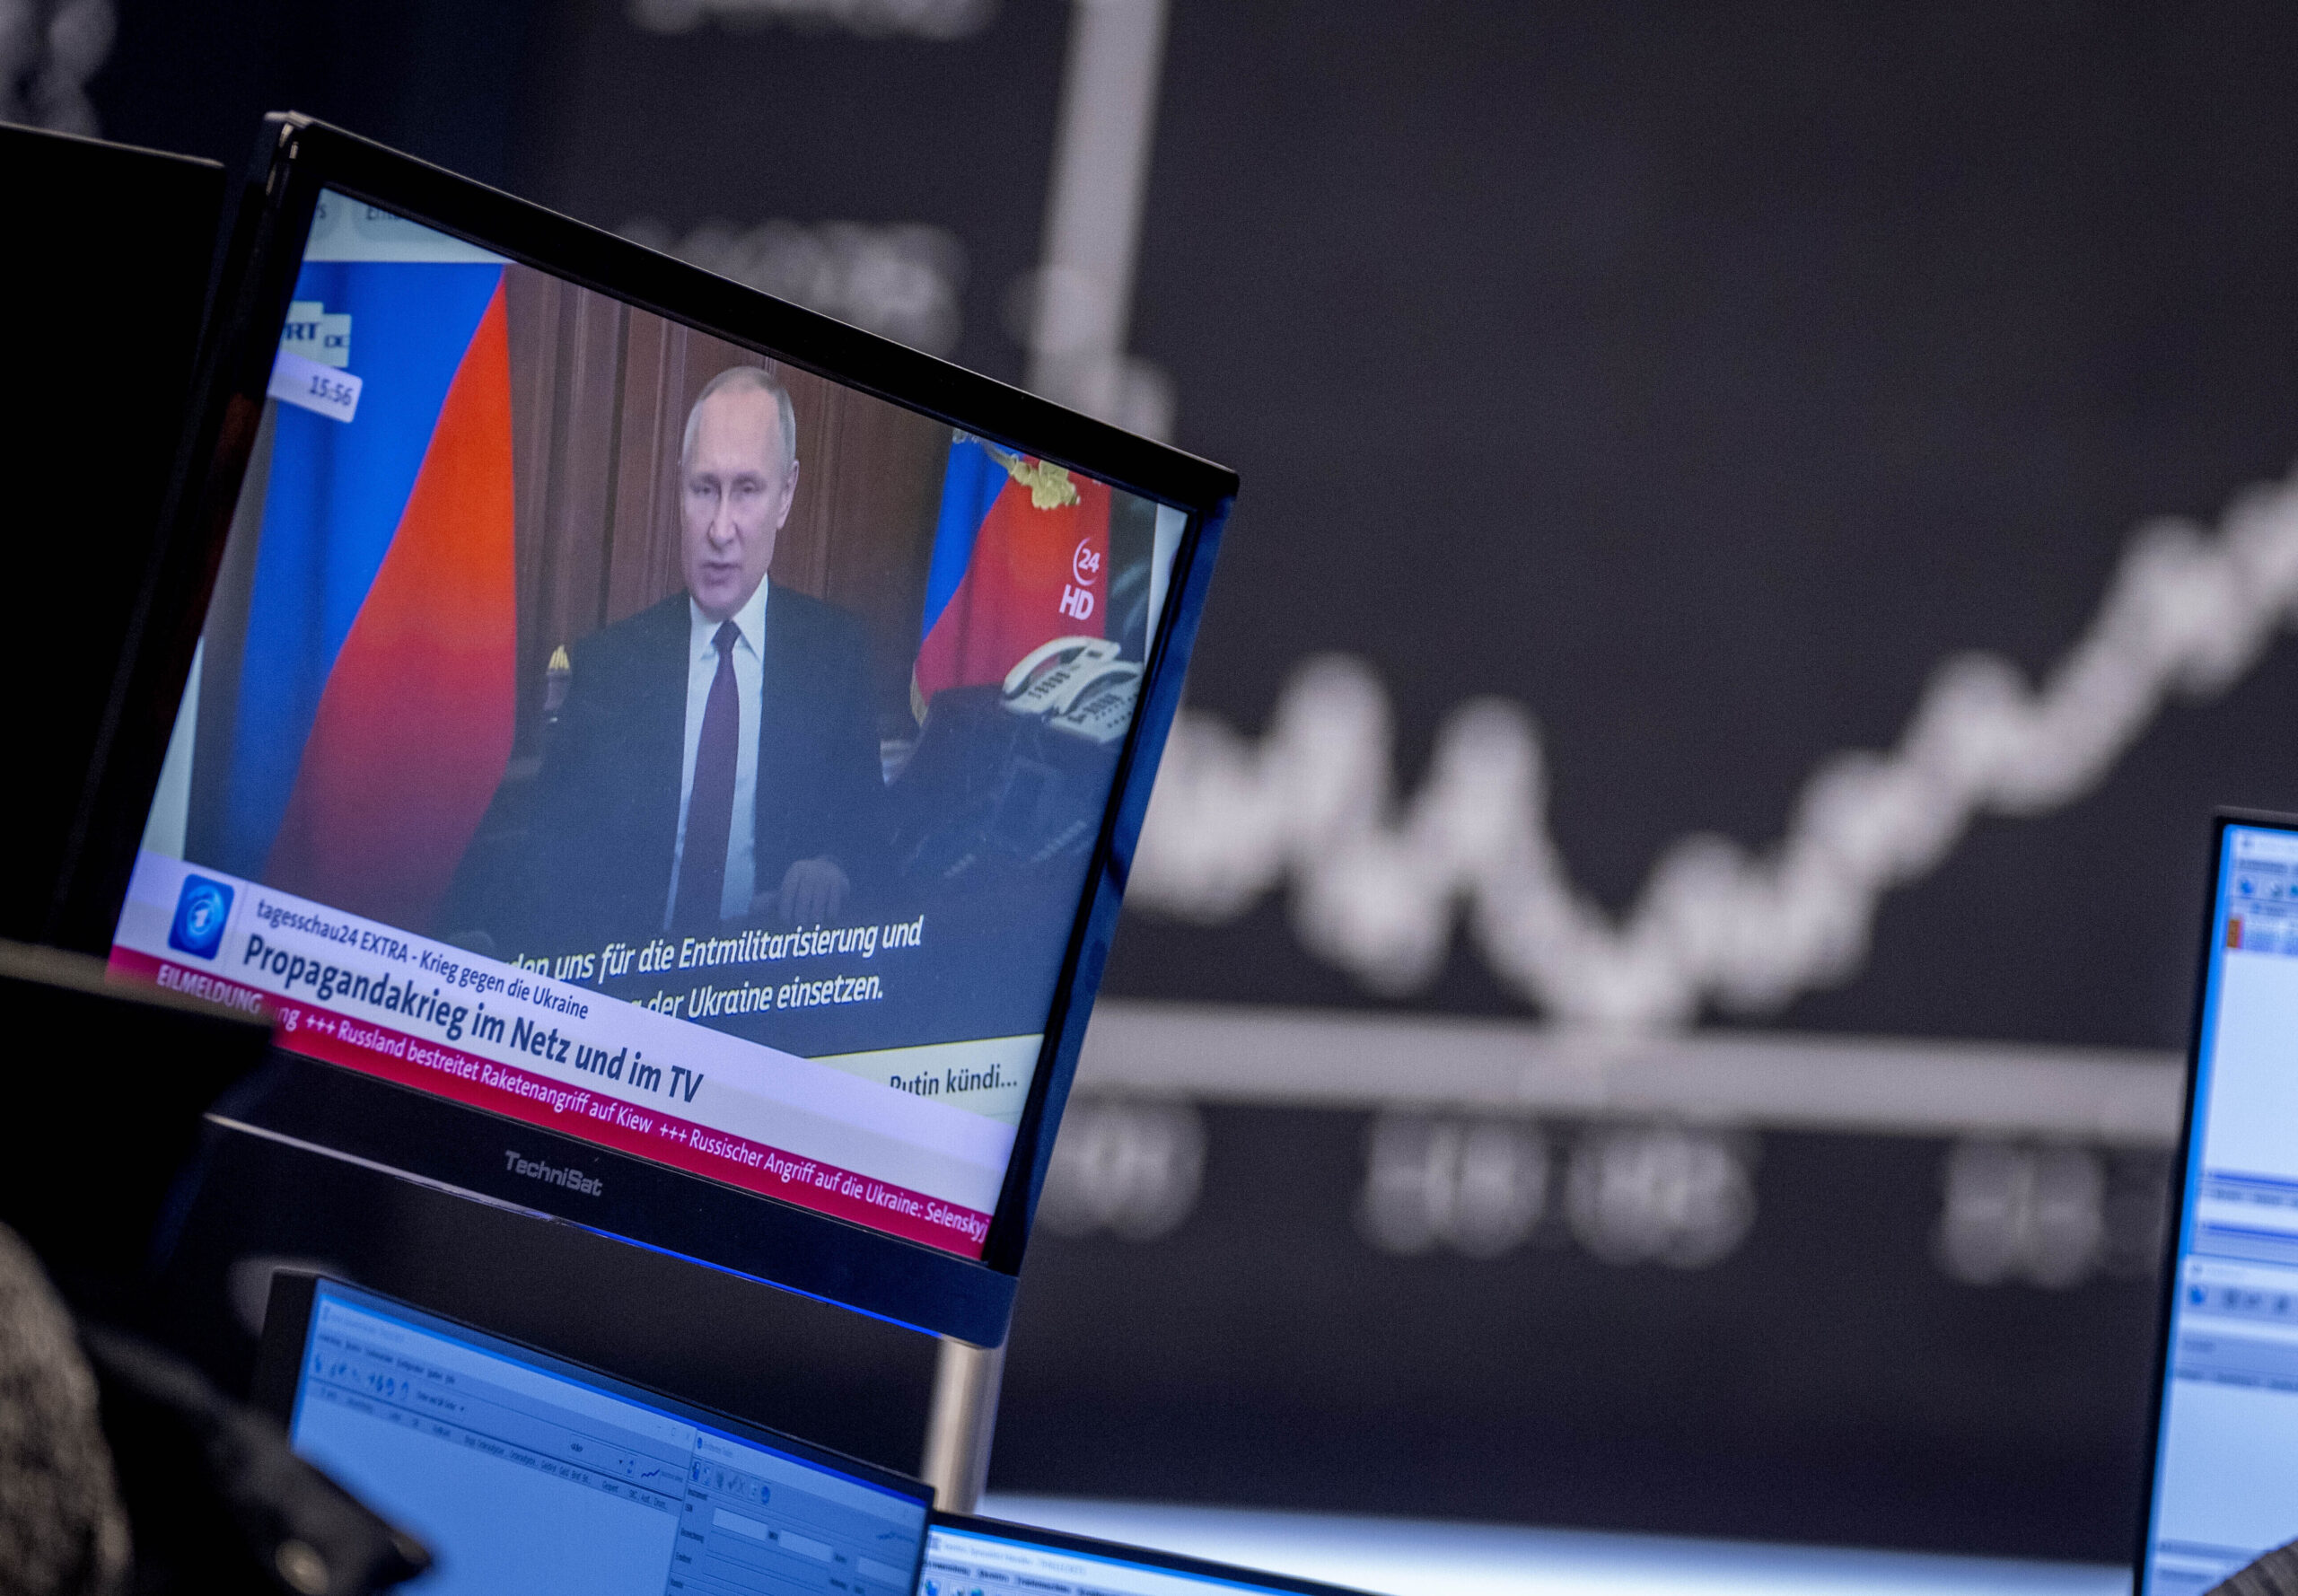 FILE - Russia's President Vladimir Putin appears on a television screen at the stock market in Frankfurt, Germany, Feb. 25, 2022. Russia is revving up its sophisticated propaganda machine as its military advances in neighboring Ukraine. Analysts who monitor propaganda and disinformation say they've seen a sharp increase in online activity linked to the Russian state in recent weeks. (AP Photo/Michael Probst, File)